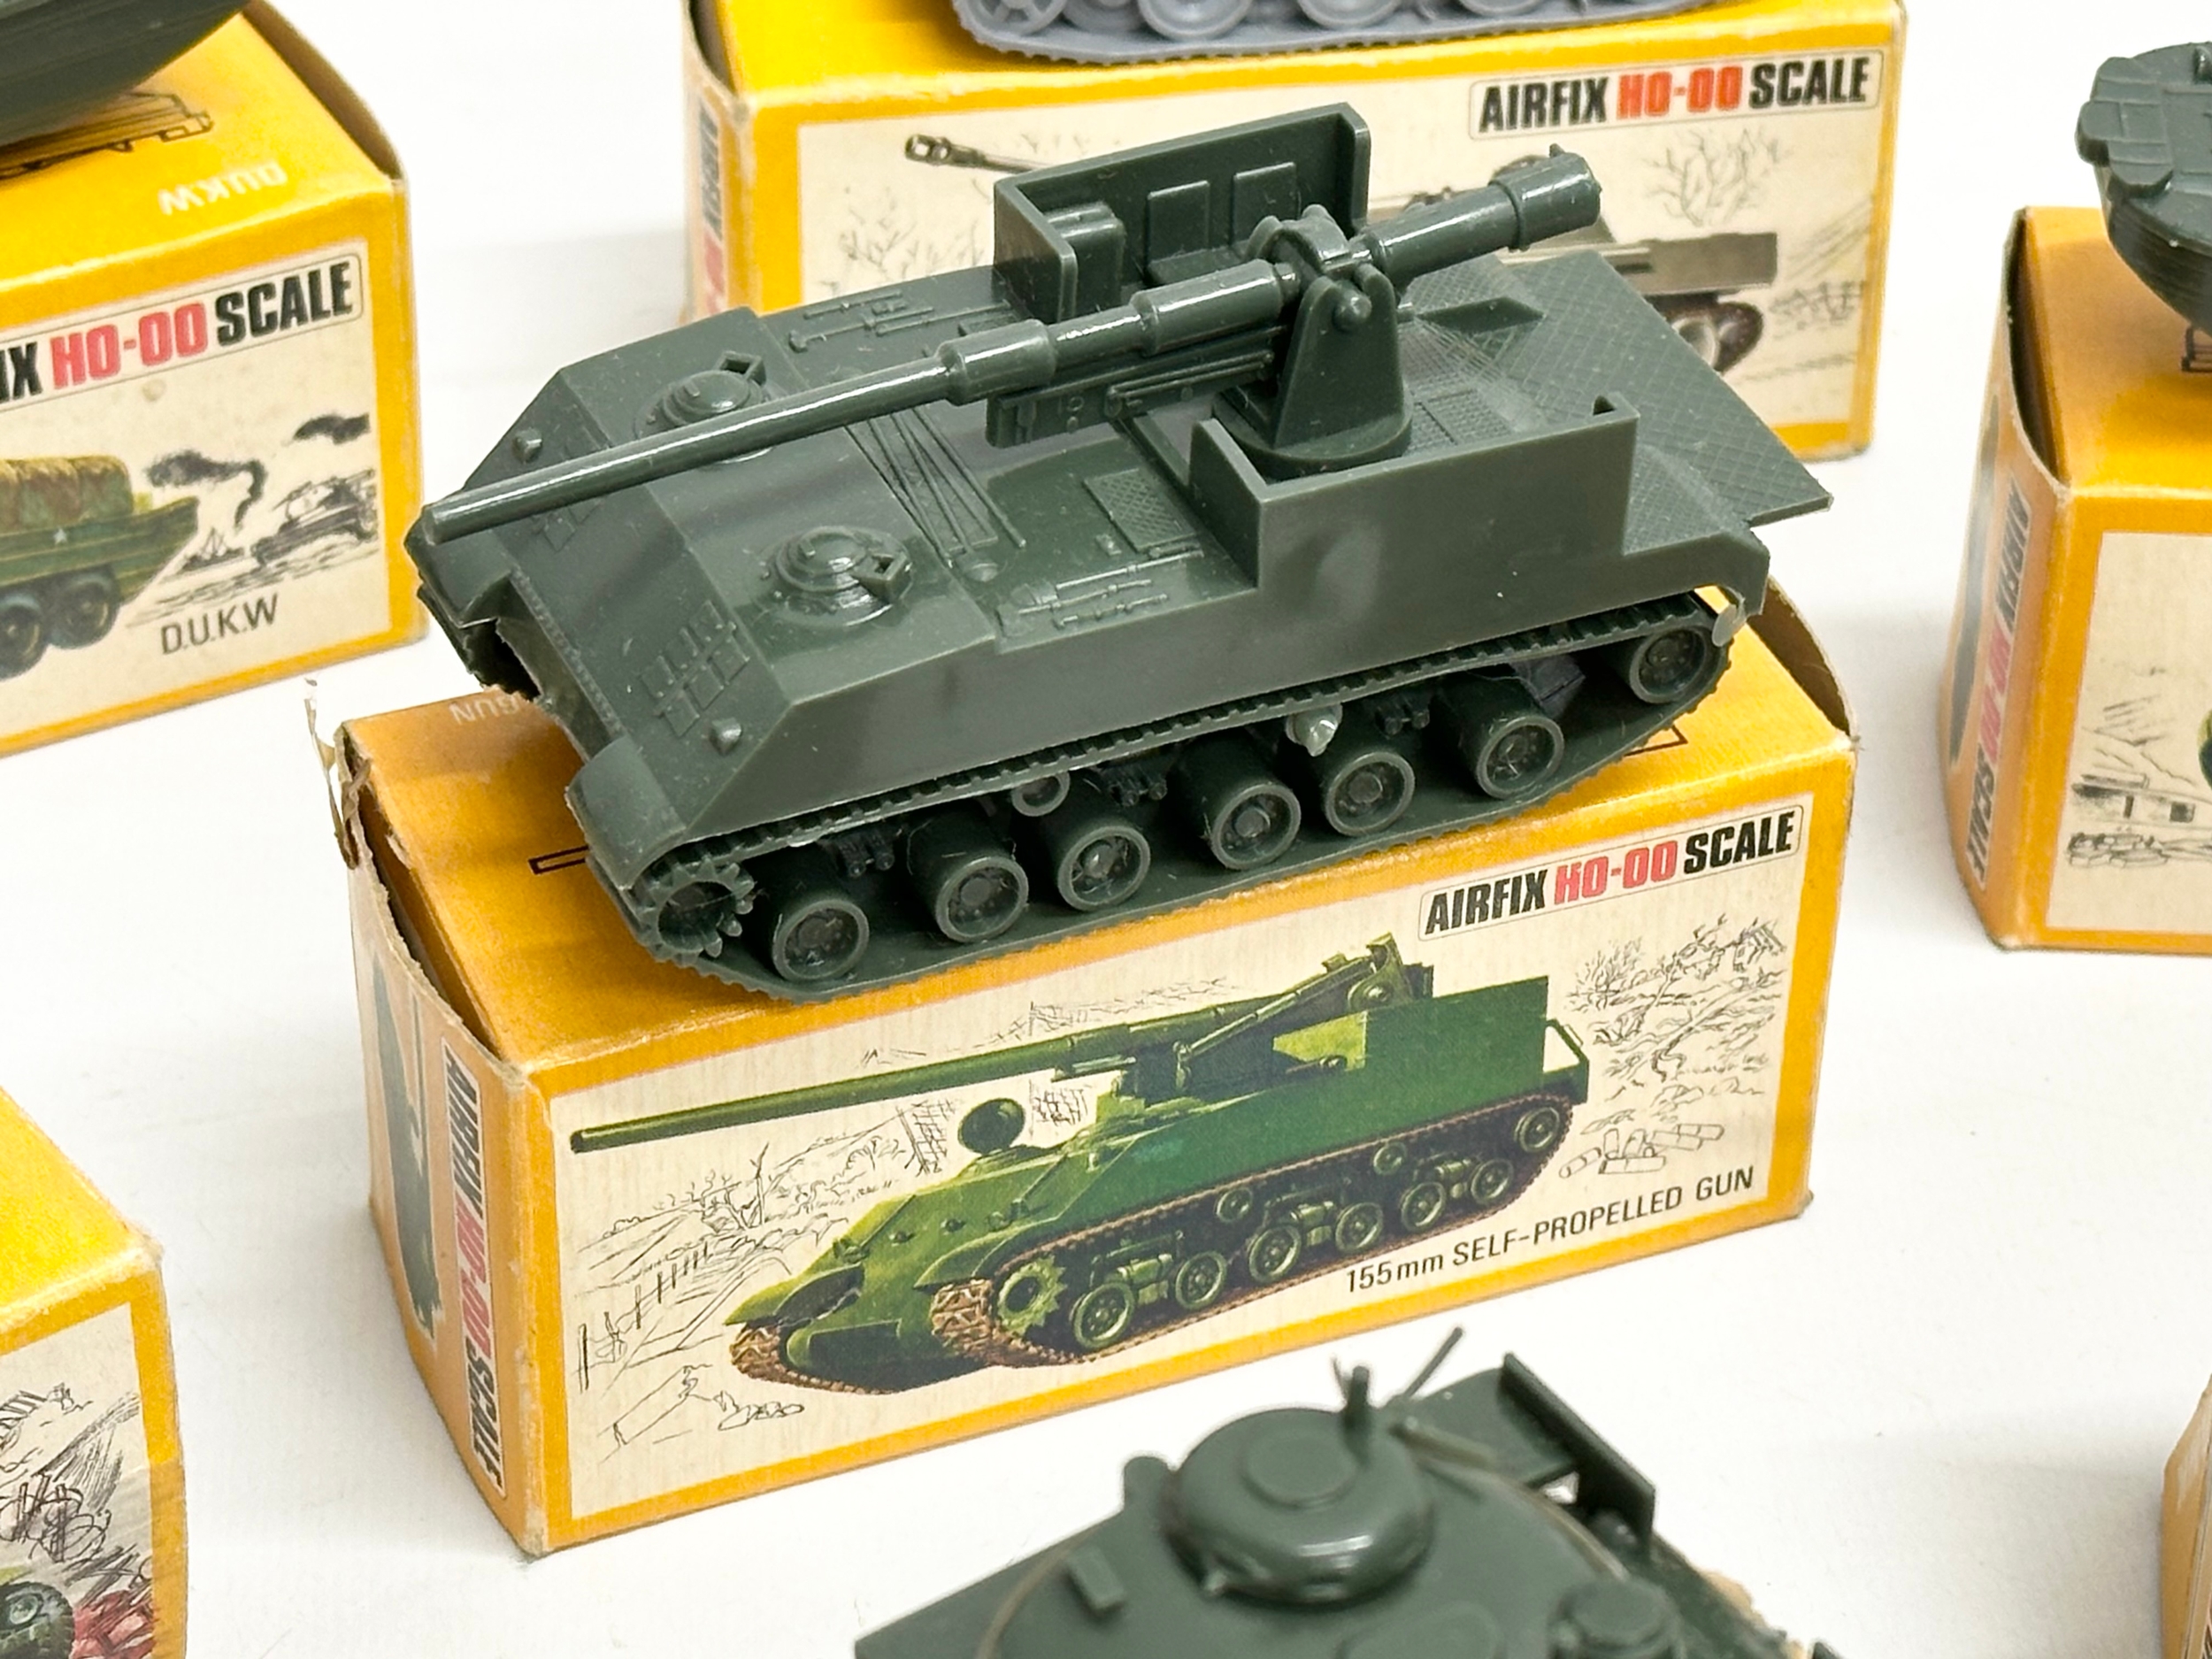 A collection of vintage Airfix HO-OO scale vehicles with boxes and soldiers. - Image 6 of 12